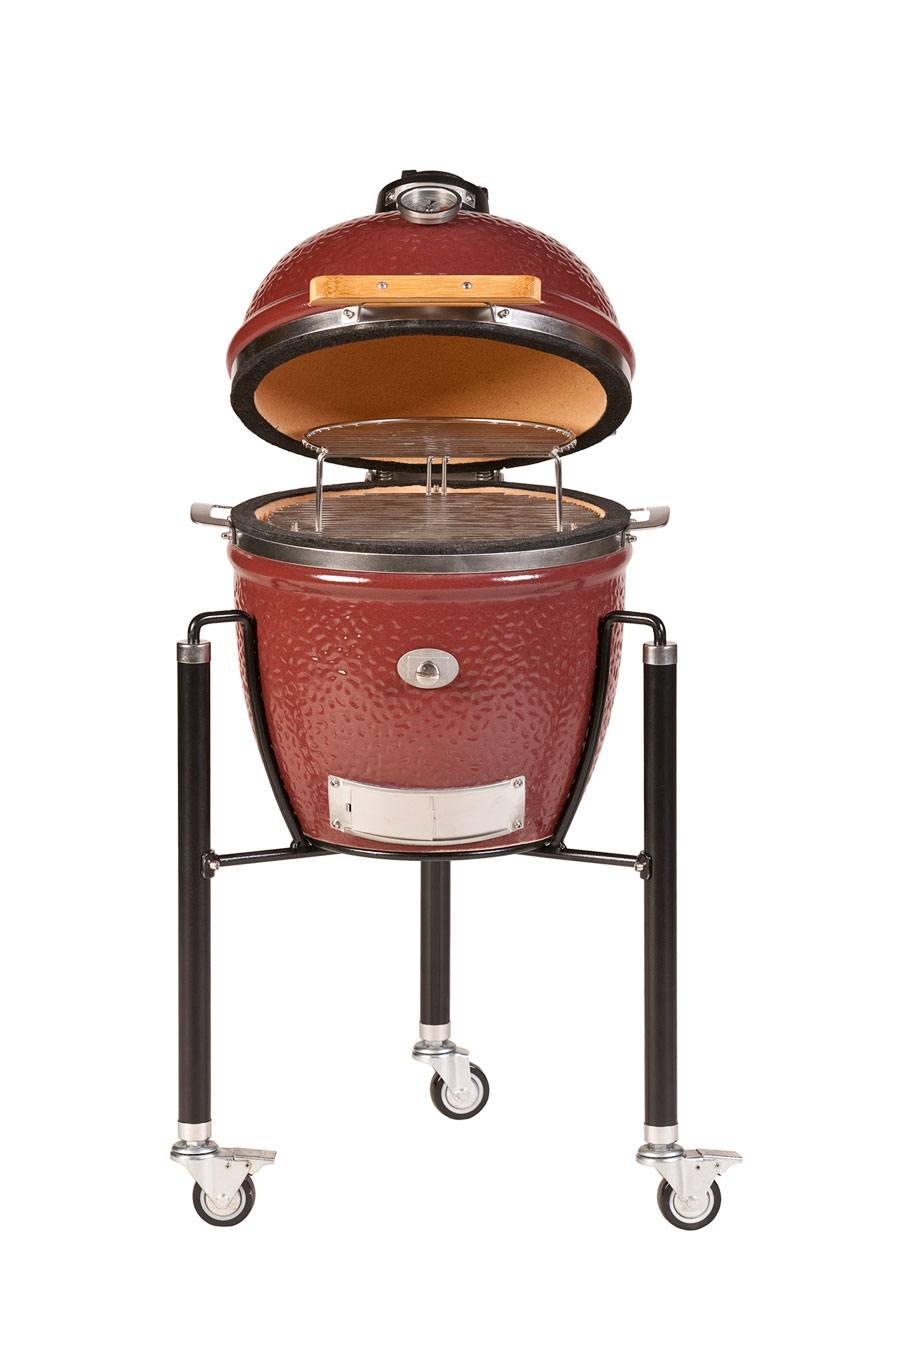 Monolith Junior 33cm Kamado Ceramic Barbecue Grill Red with Cart